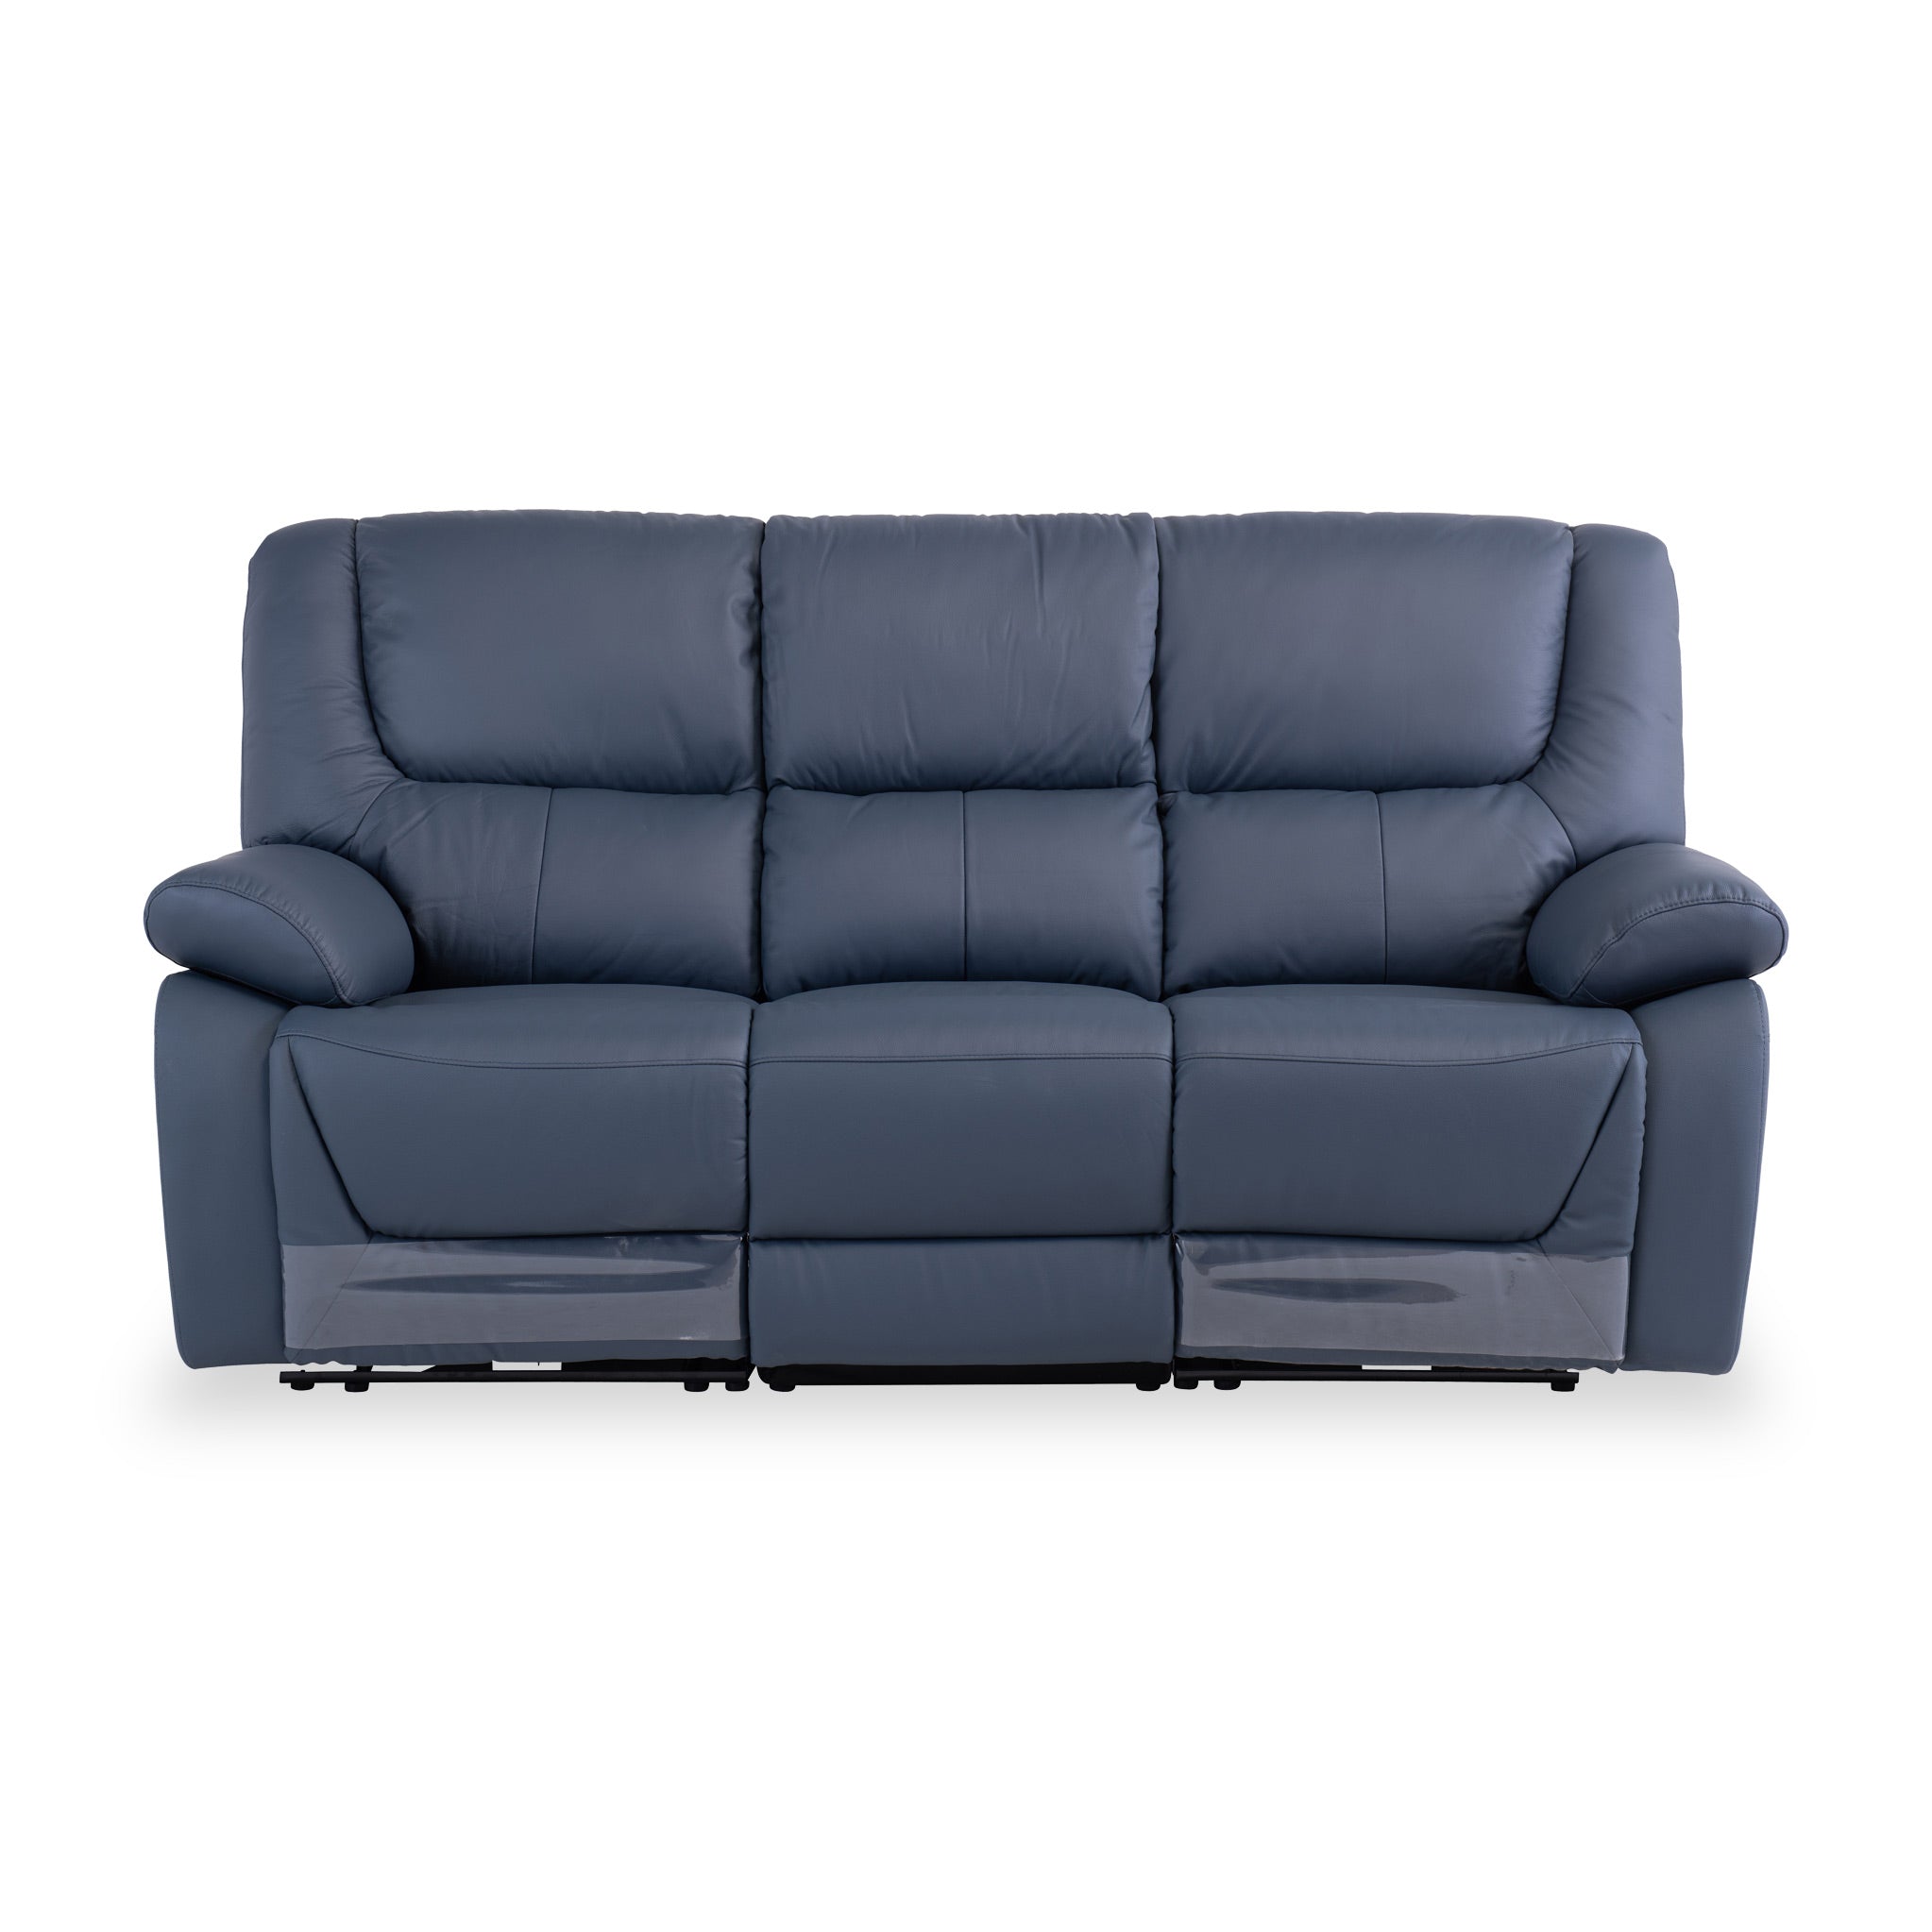 Baxter Leather Electric Reclining 3 Seater Sofa Blue Grey Roseland